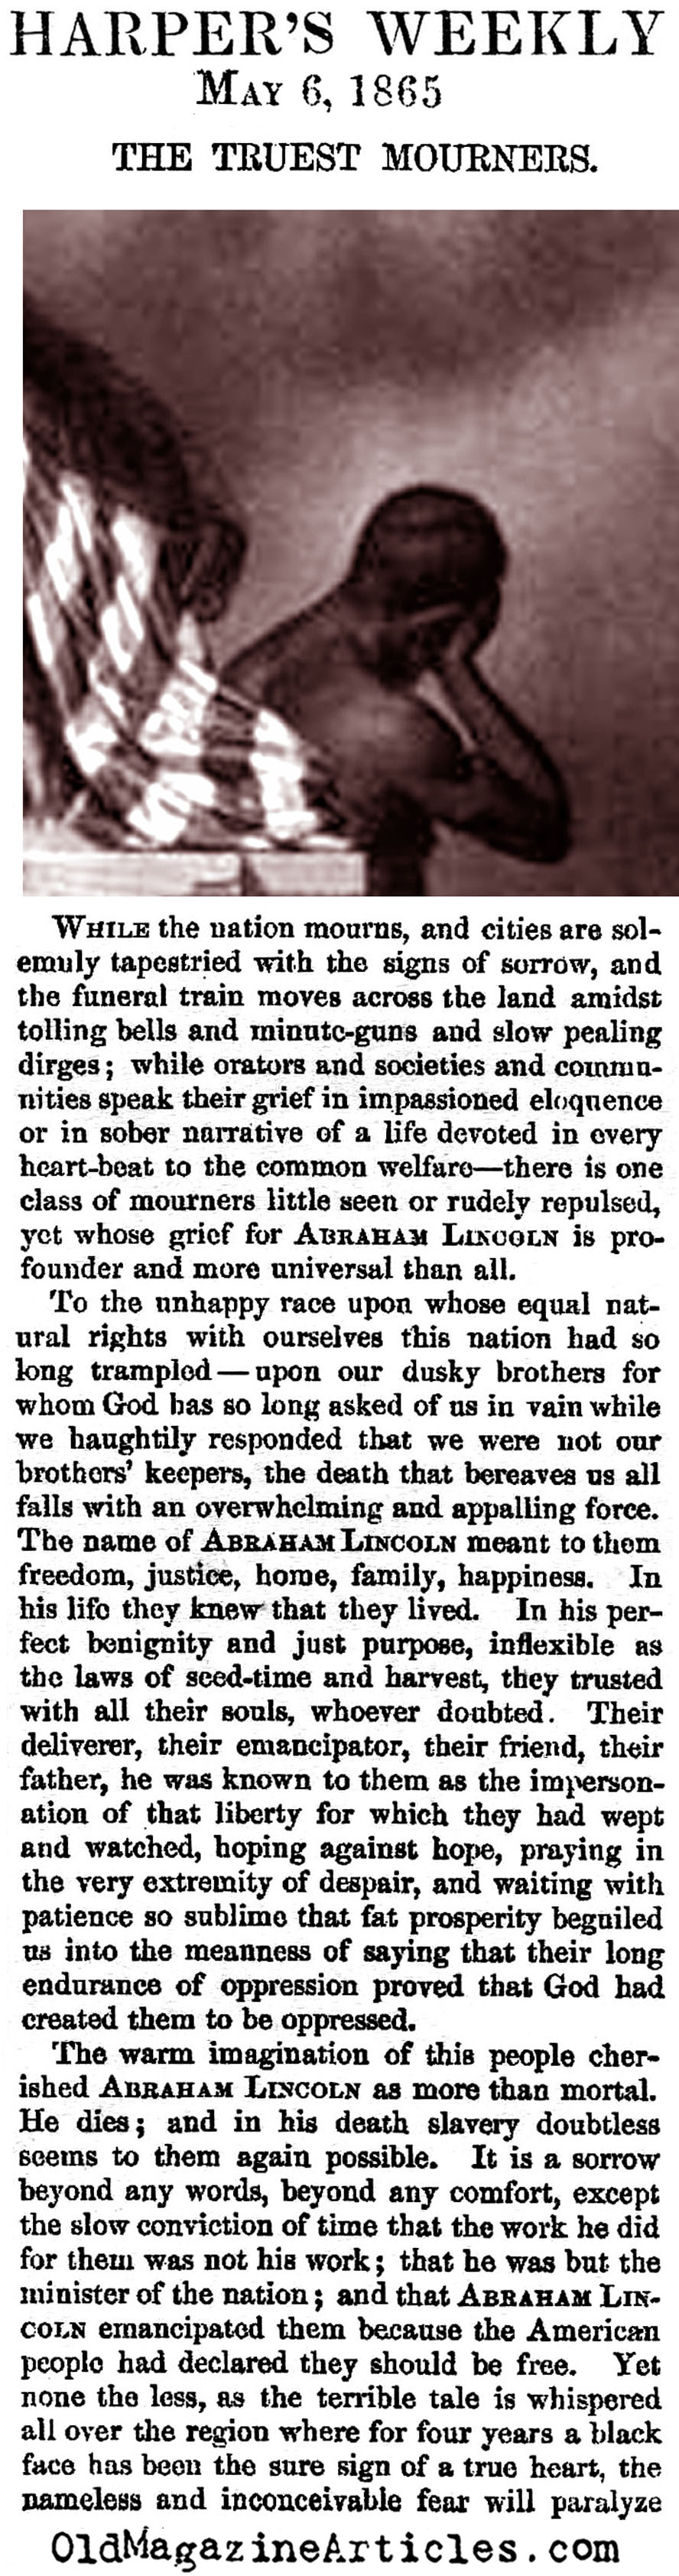 Lincoln's Truest Mourners (Harper's Weekly, 1865)